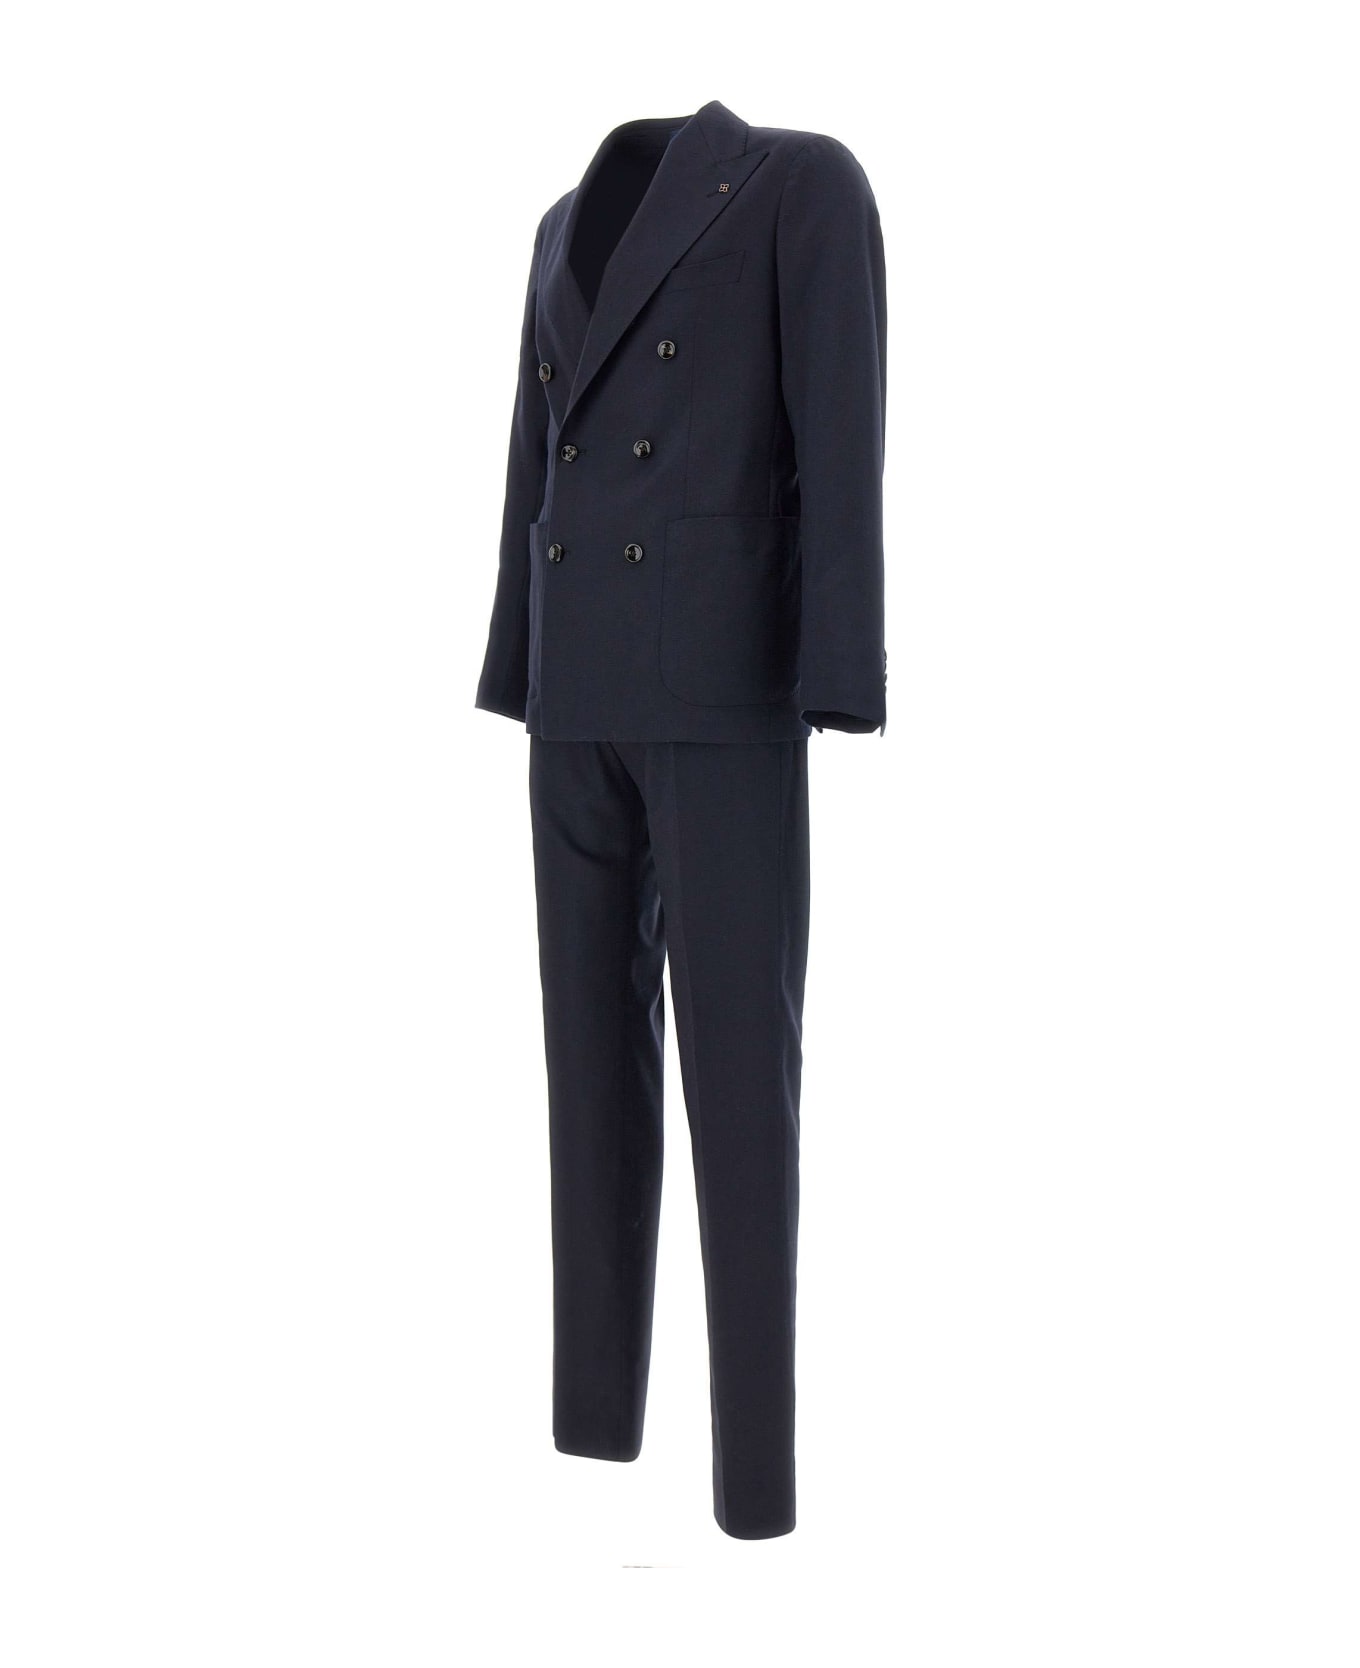 Tagliatore Wool And Cashmere Suit - BLUE